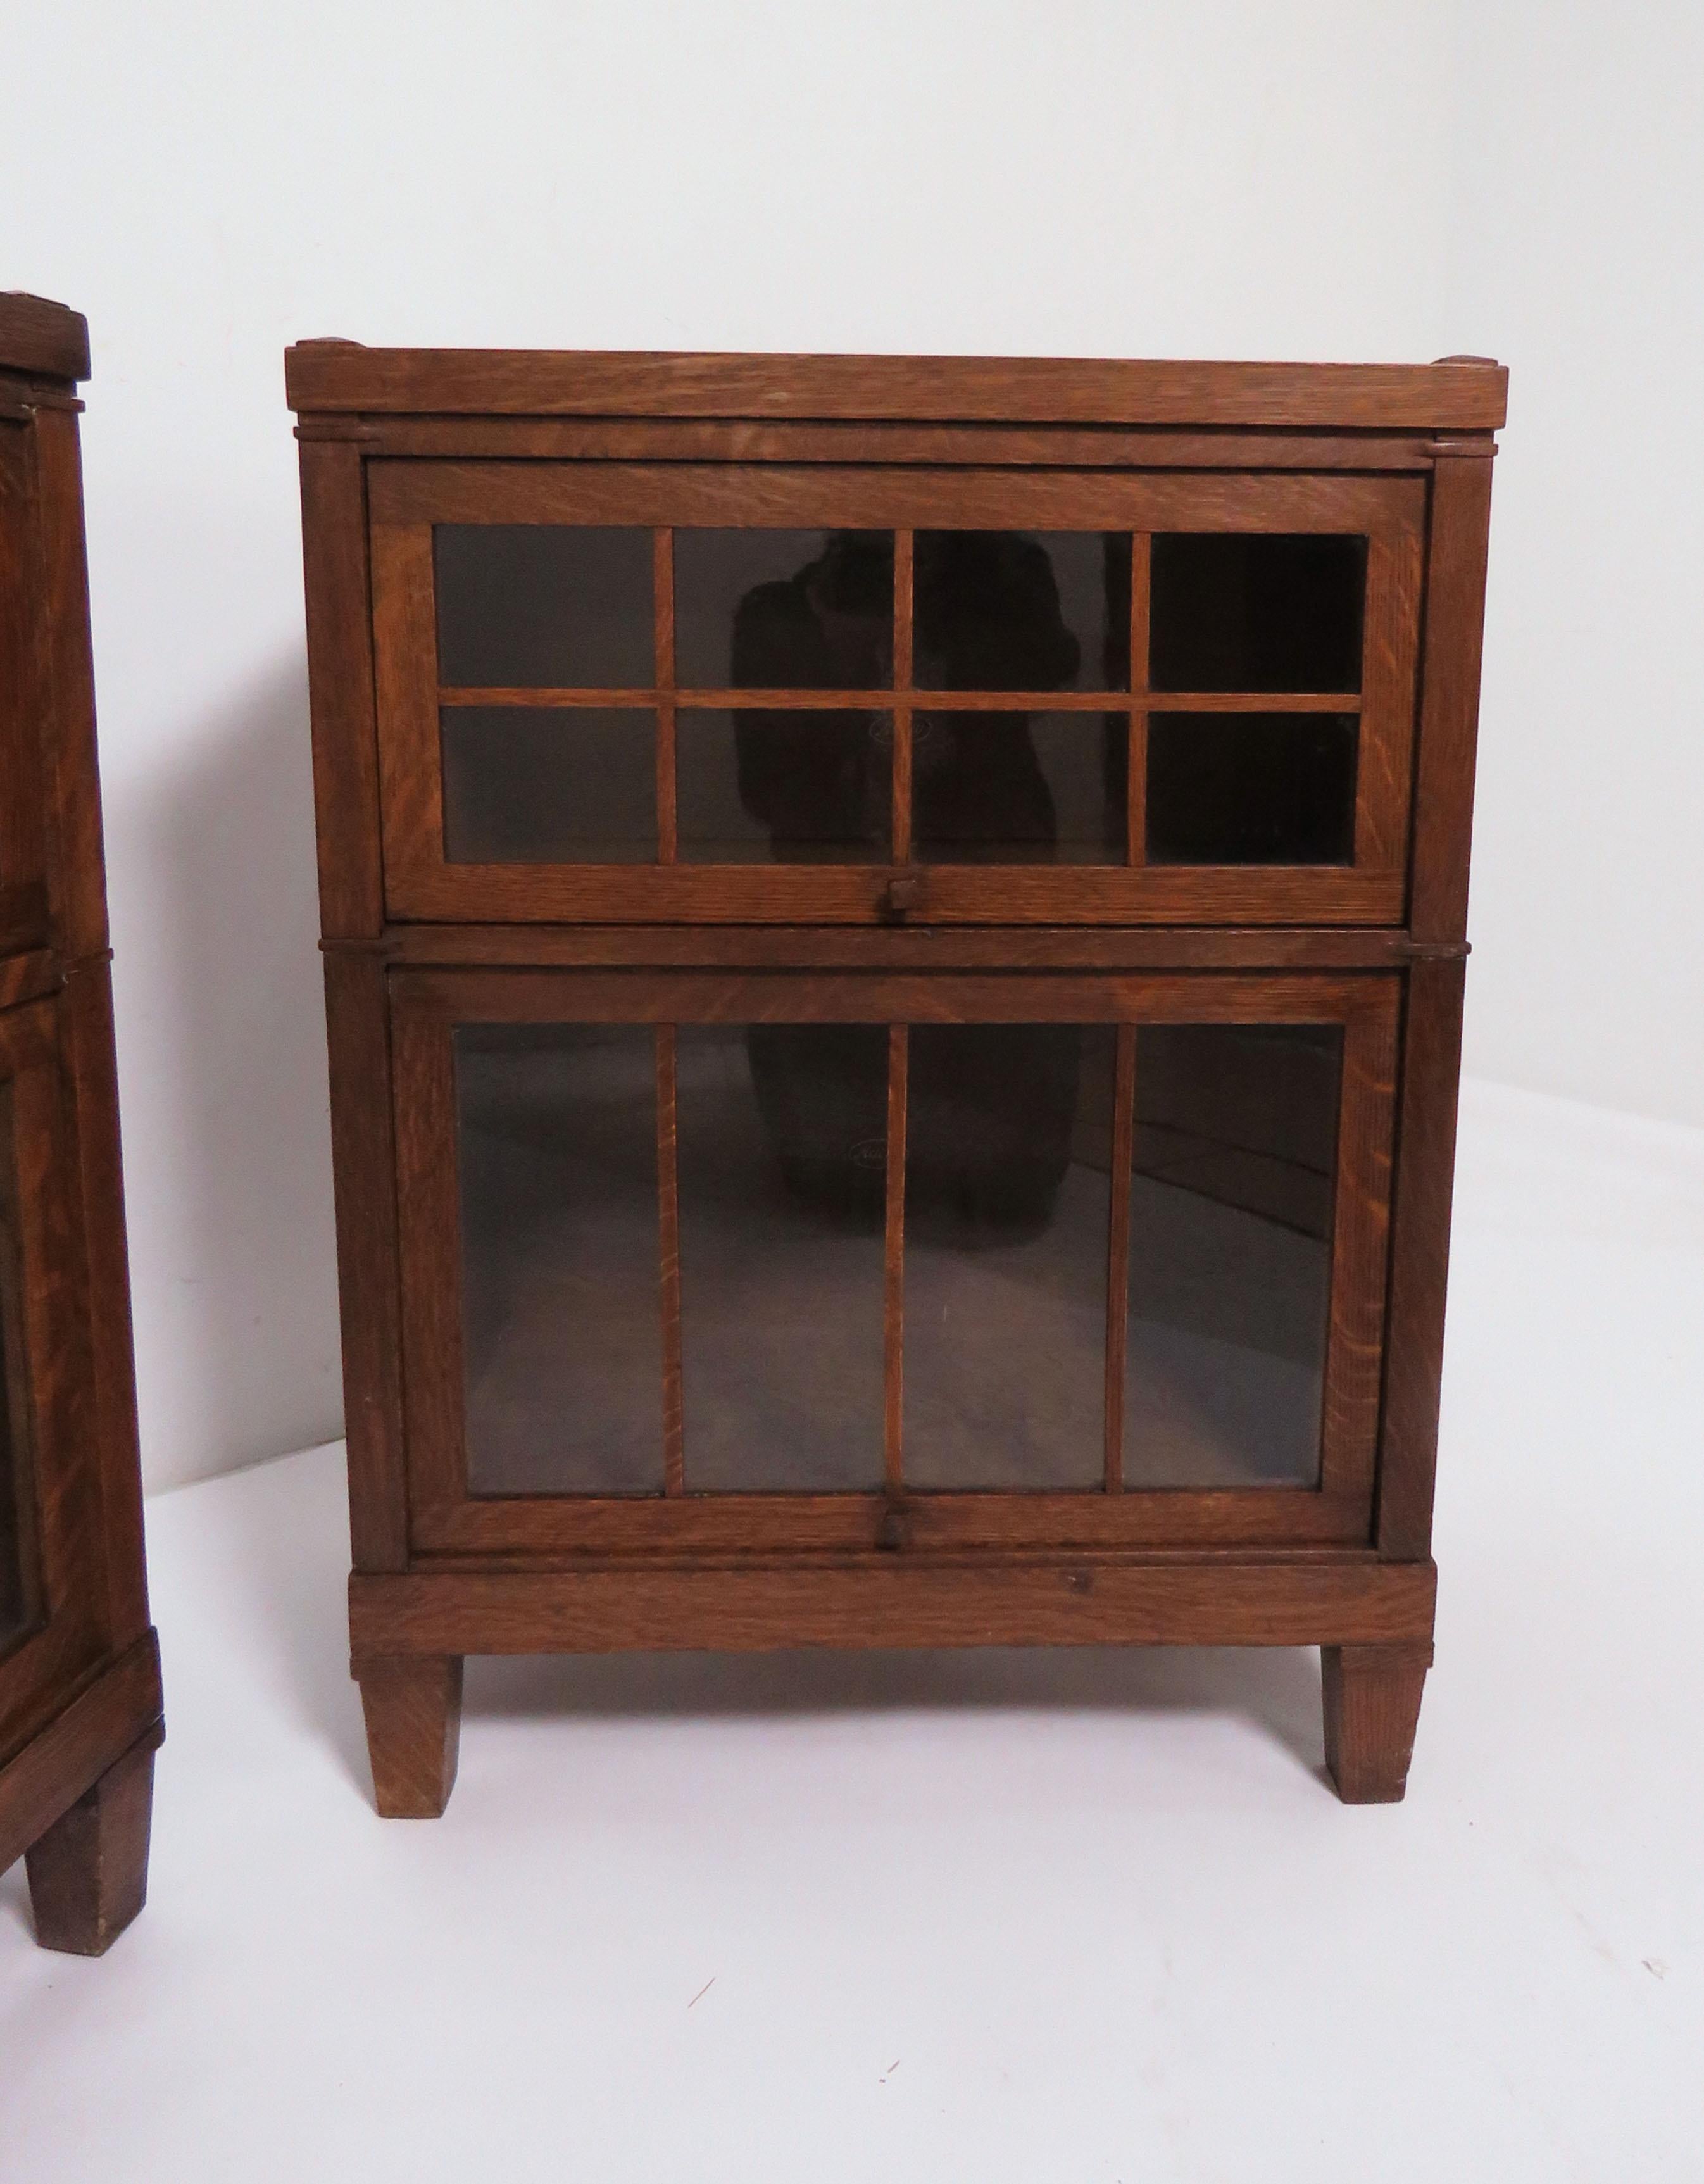 Early 20th Century Pair of Mission Oak Arts & Crafts Barrister Bookcase Cabinets by Macey Co.